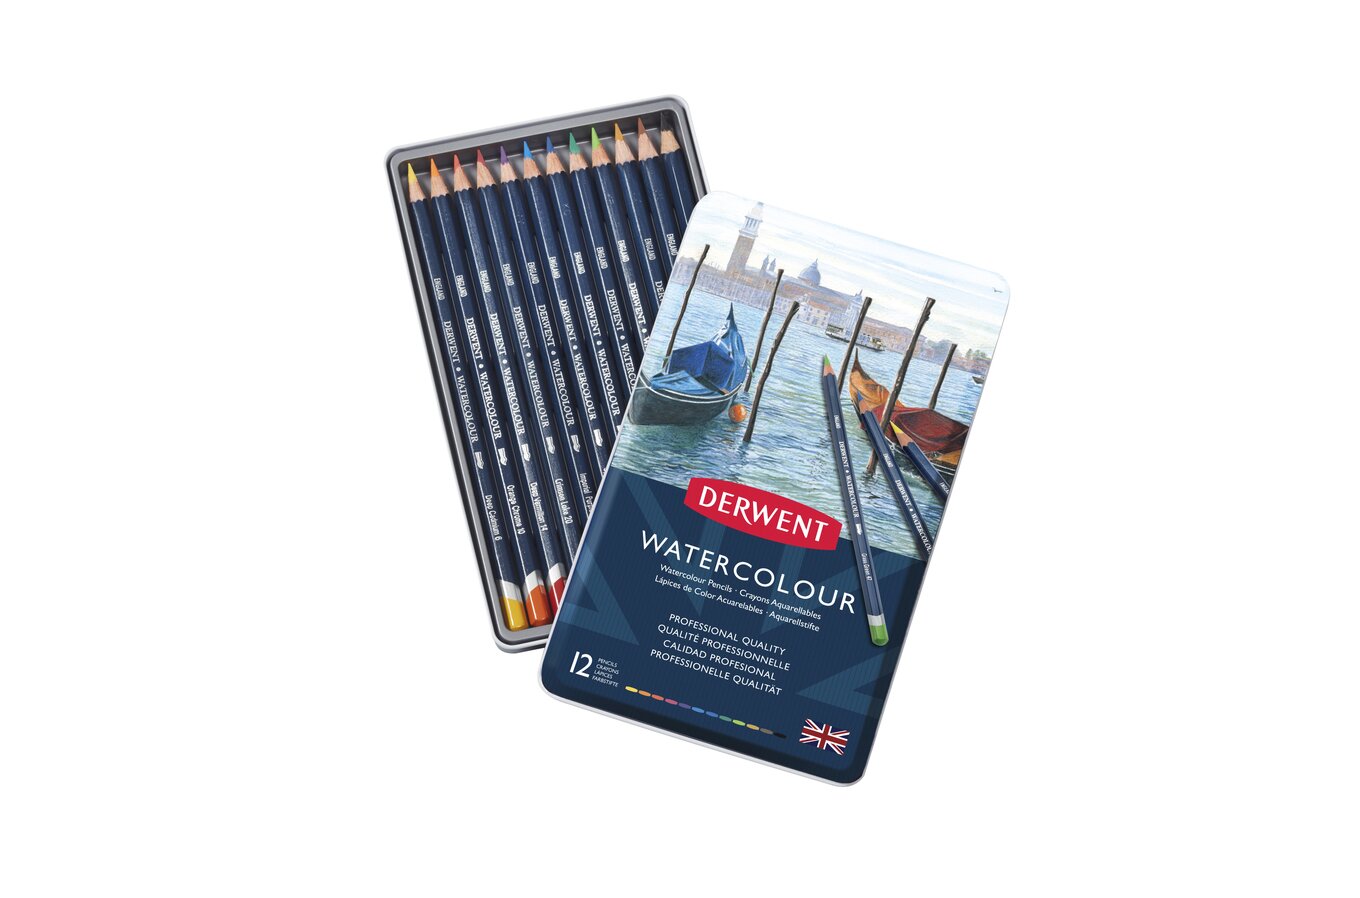 Derwent Colored Pencils, Watercolour, Water Color Pencils, Drawing, Art, Metal Tin, 24 Count (32883)